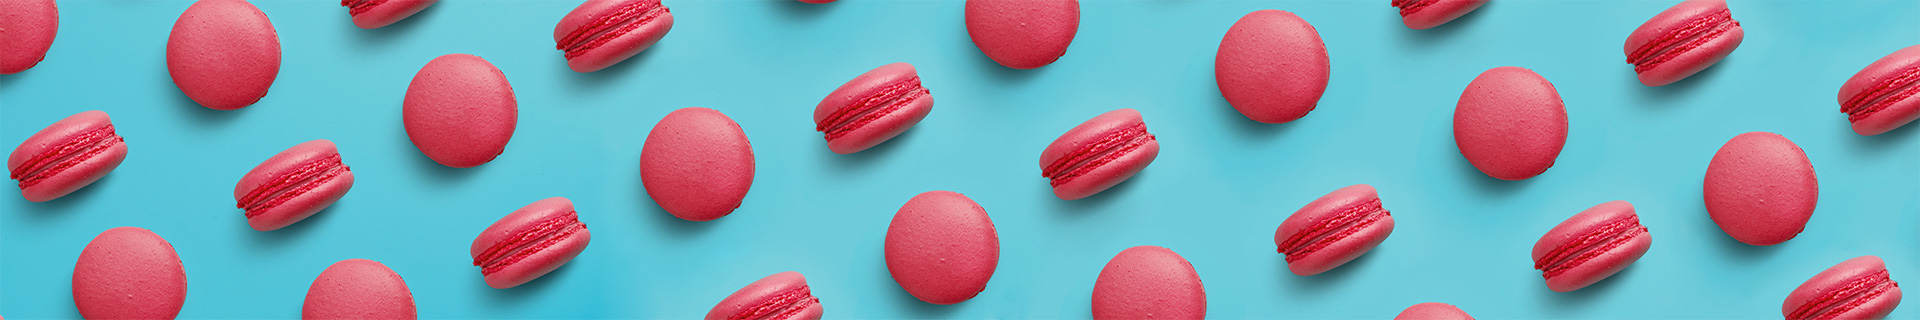 Red macarons against a blue background